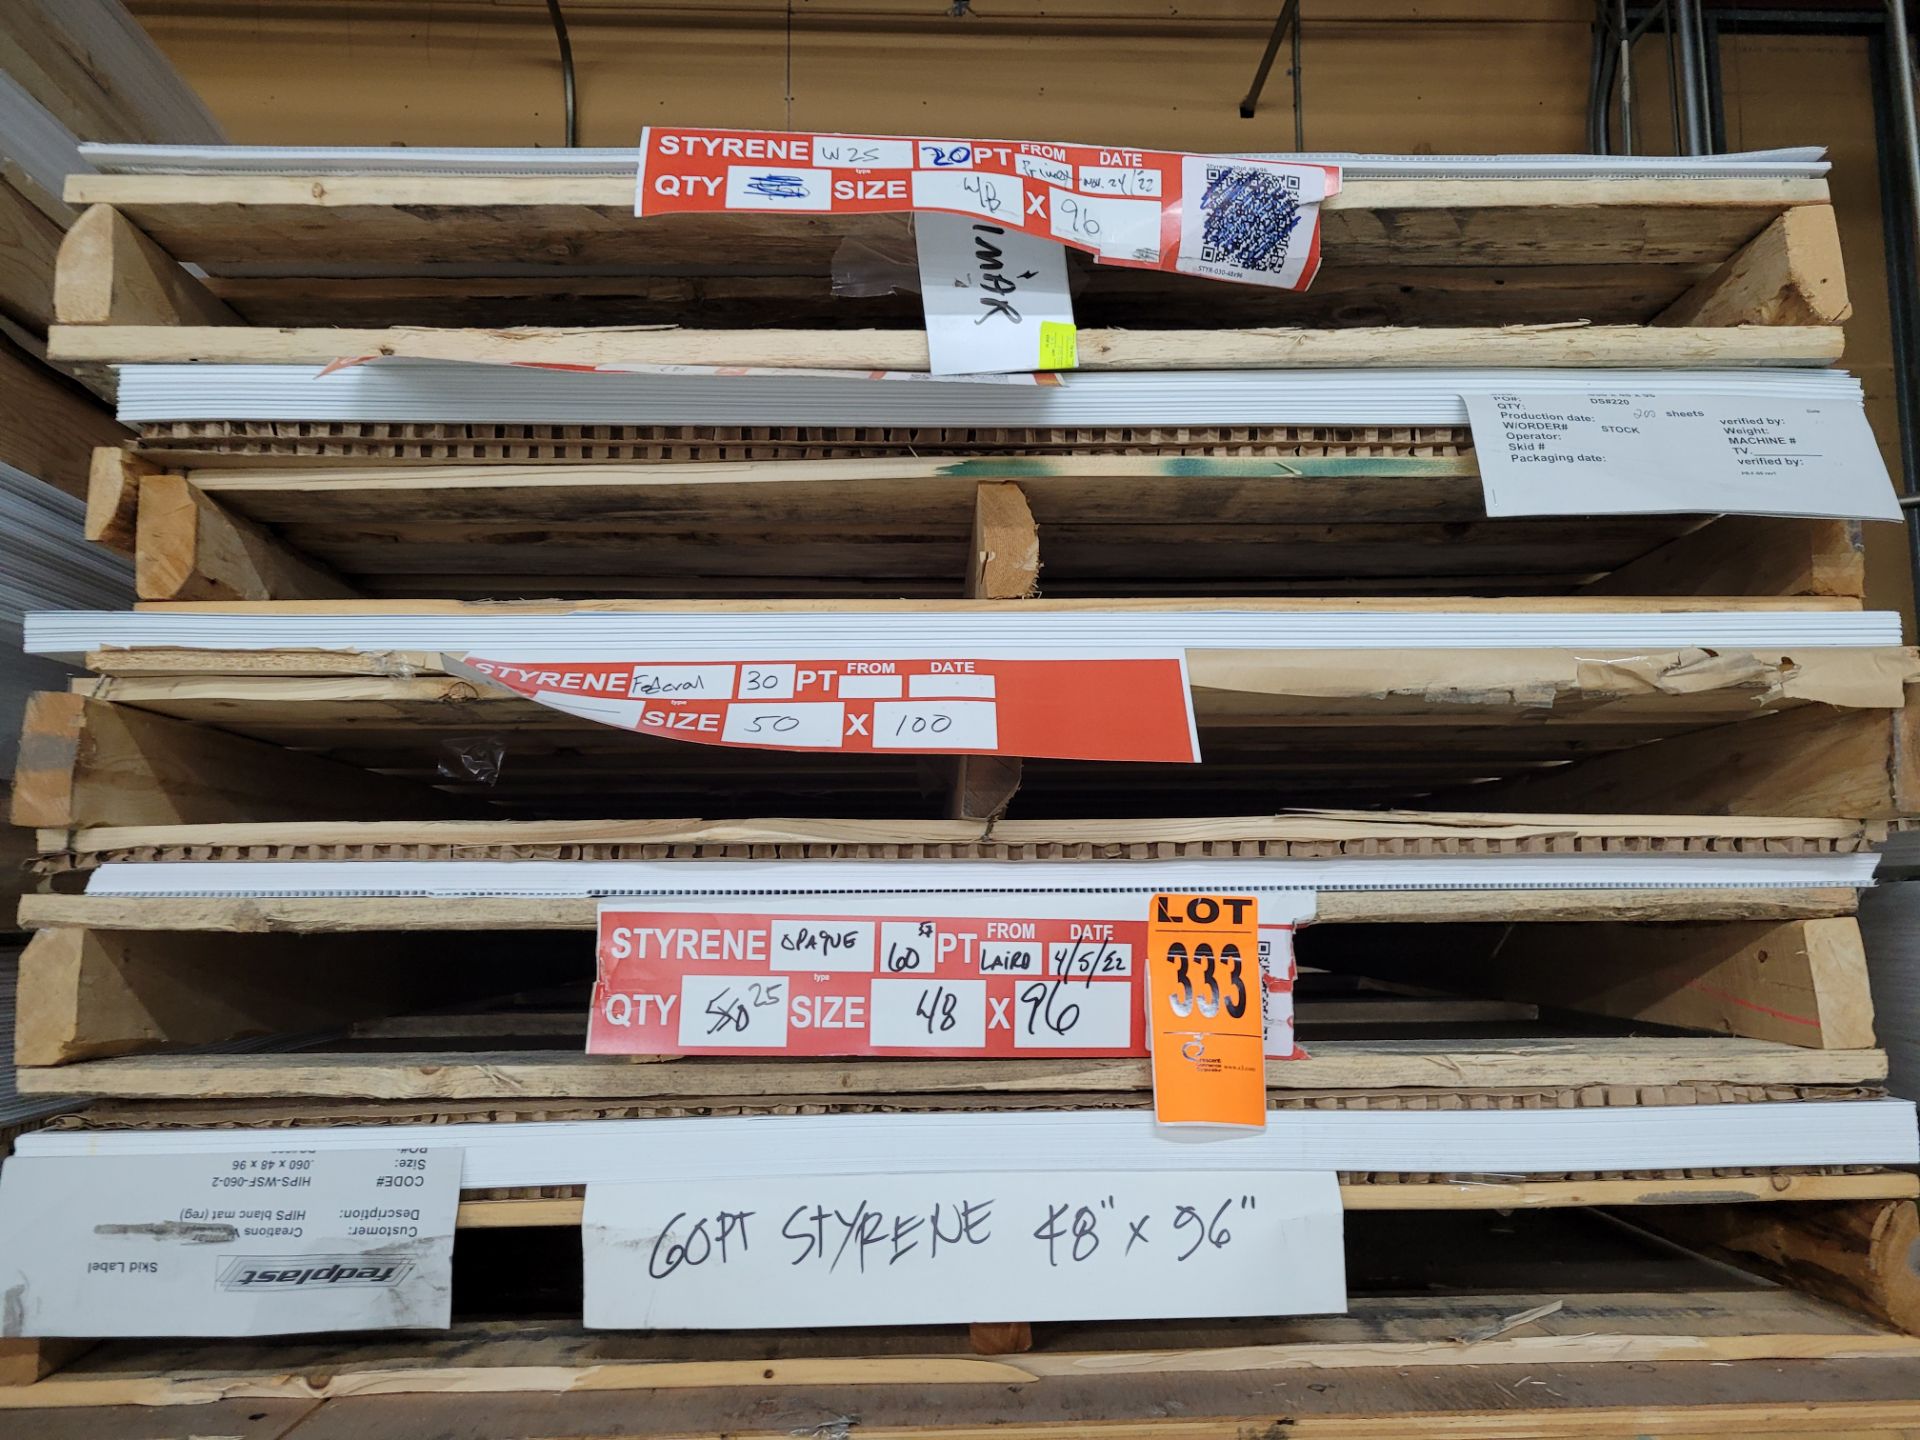 Lot of (5) Pallets of STYRENE Sheets and contents incl. 60pt Styrene 48x96, 25x 60pt 48x96, Styrene